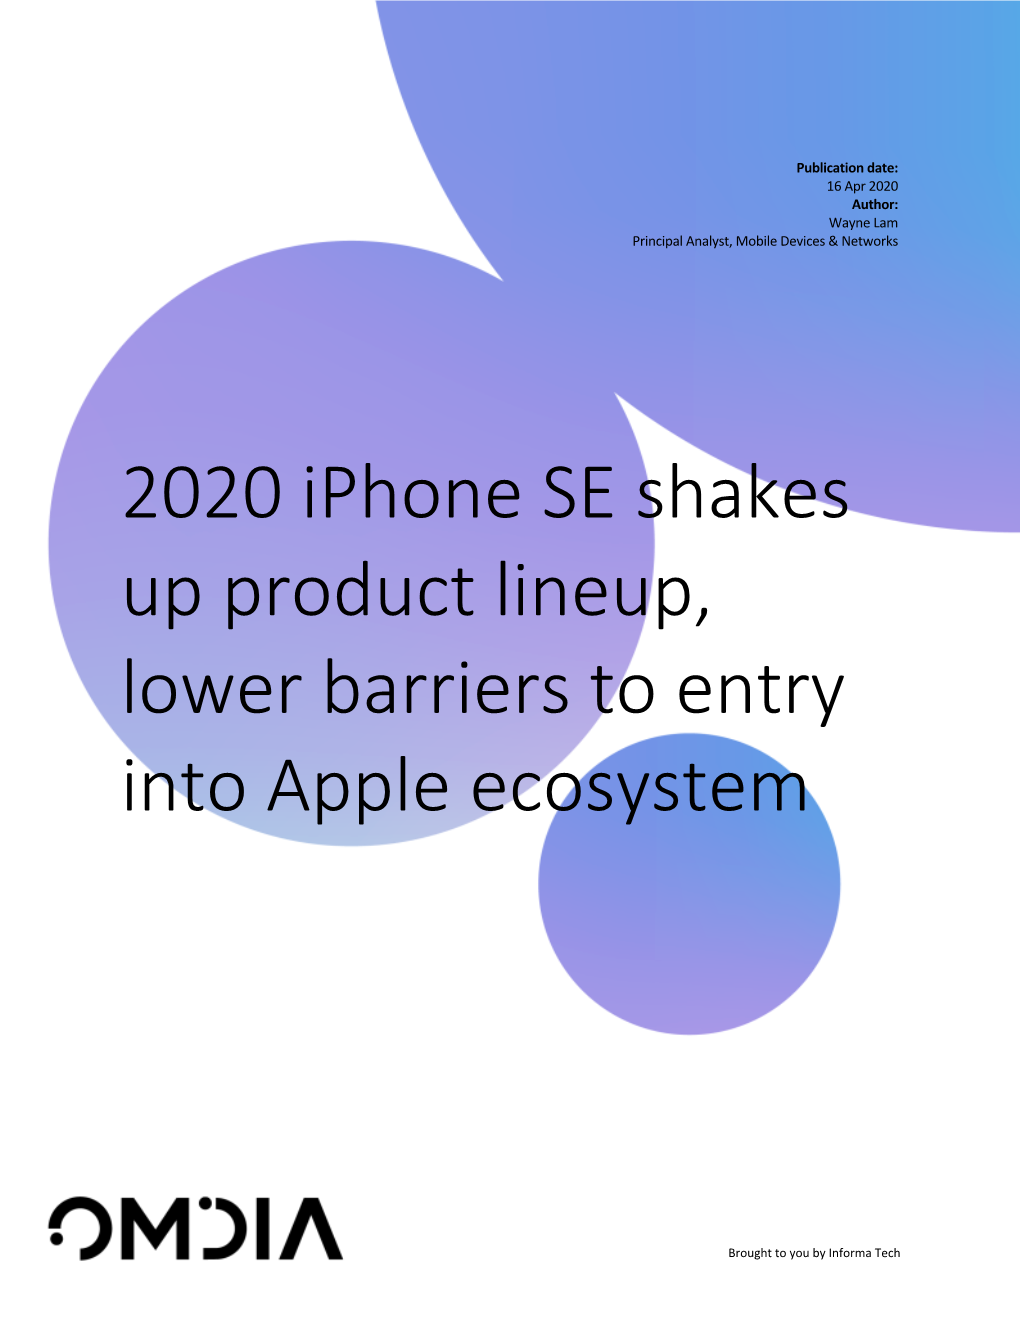 2020 Iphone SE Shakes up Product Lineup, Lower Barriers to Entry Into Apple Ecosystem